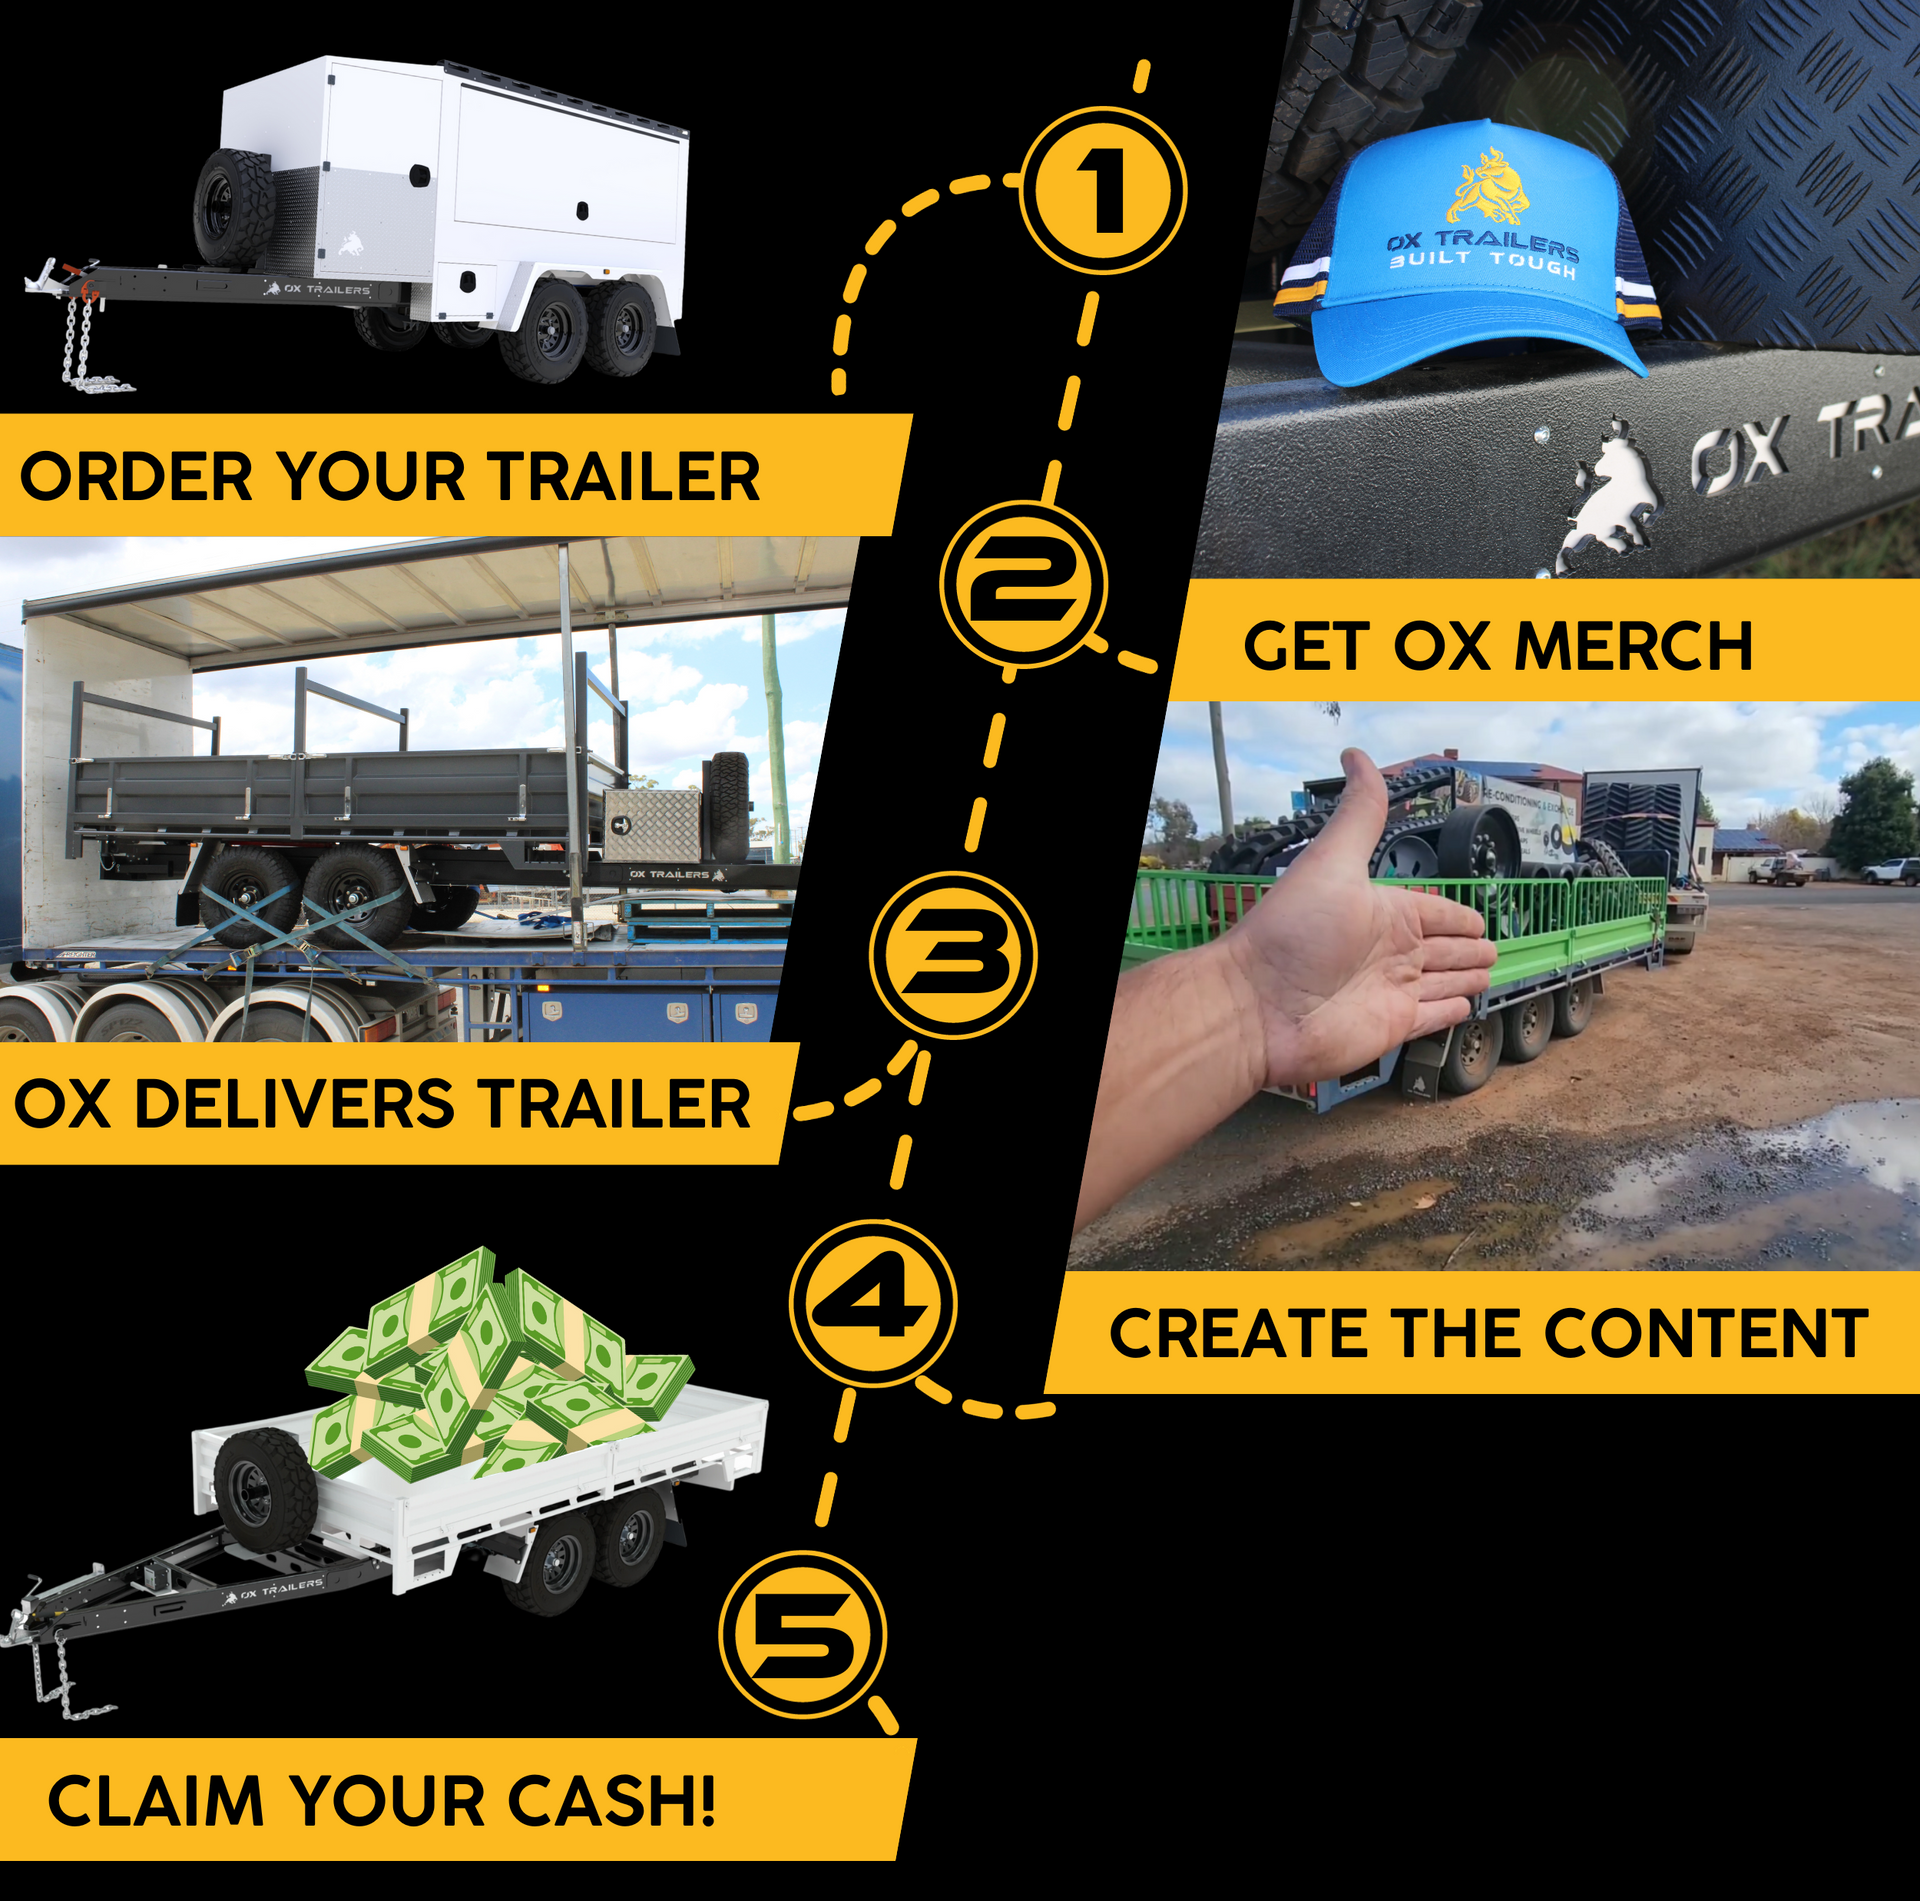 Receive up to $1650 cash back after submitting content of your trailer purchase.